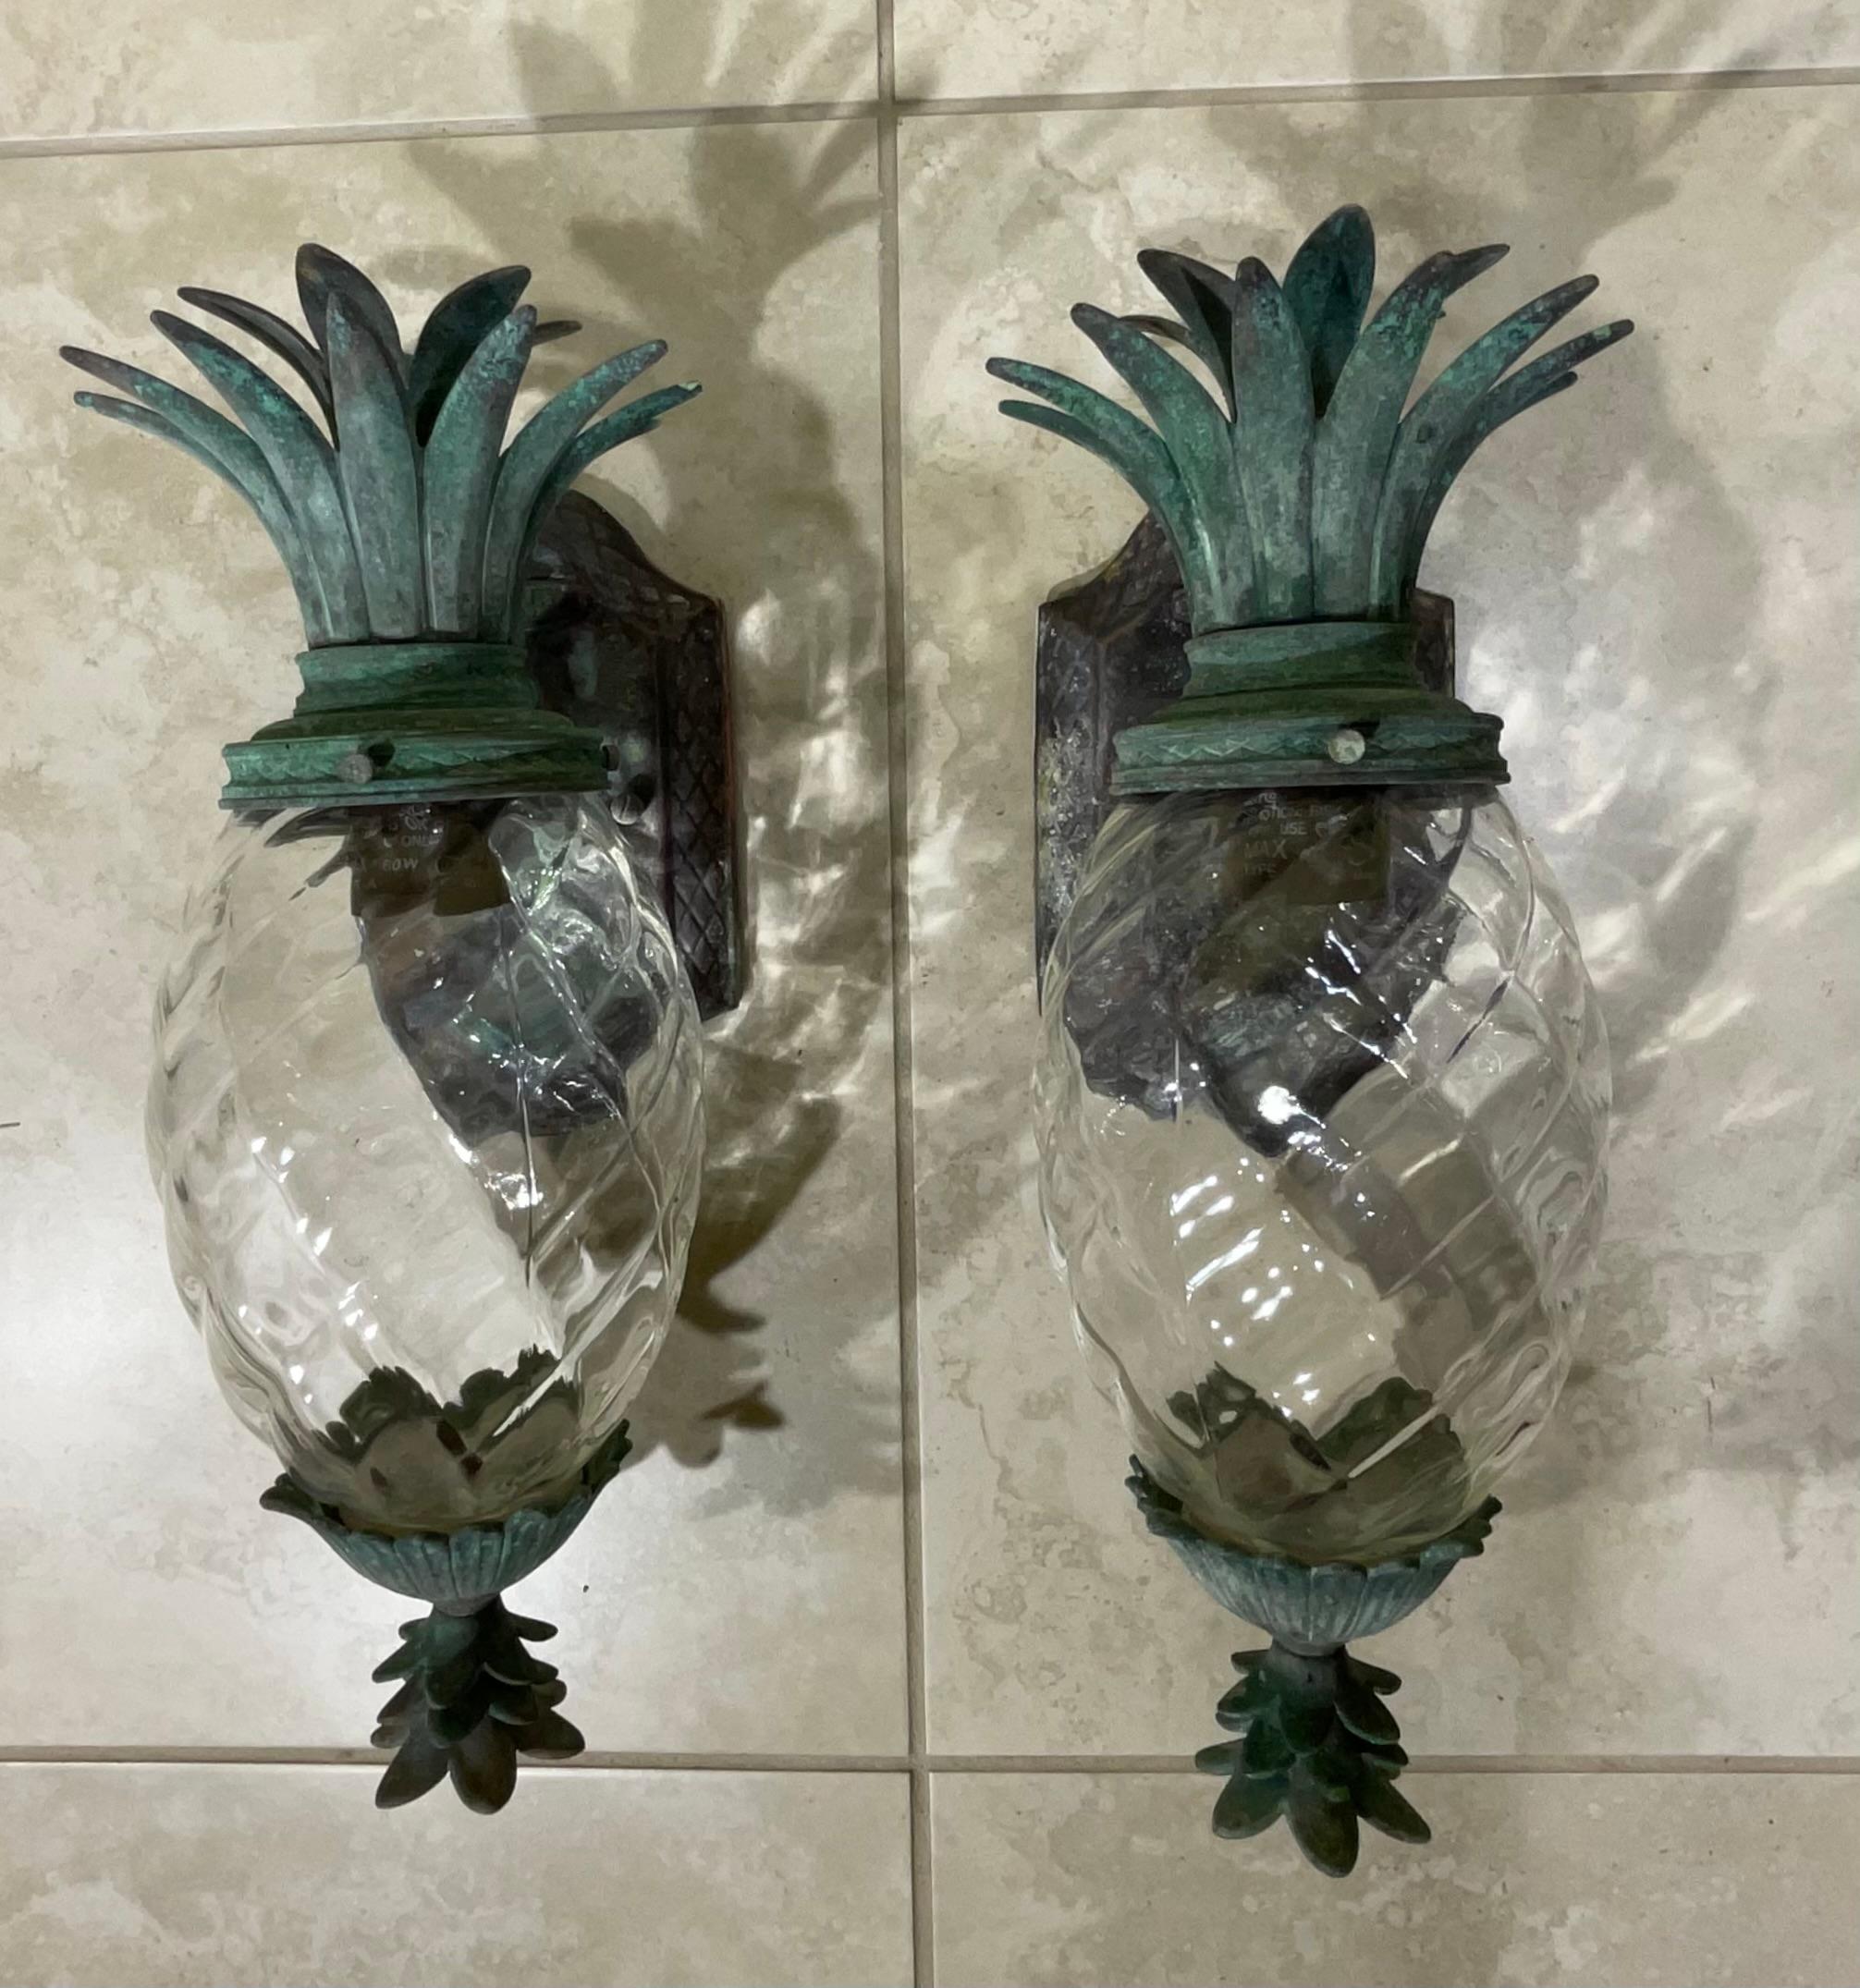 Beautiful pair of pineapple wall light made of bronze and solid brass with one 60/watt light each, great patina, decorative for indoor or outdoor.
Ready to use.